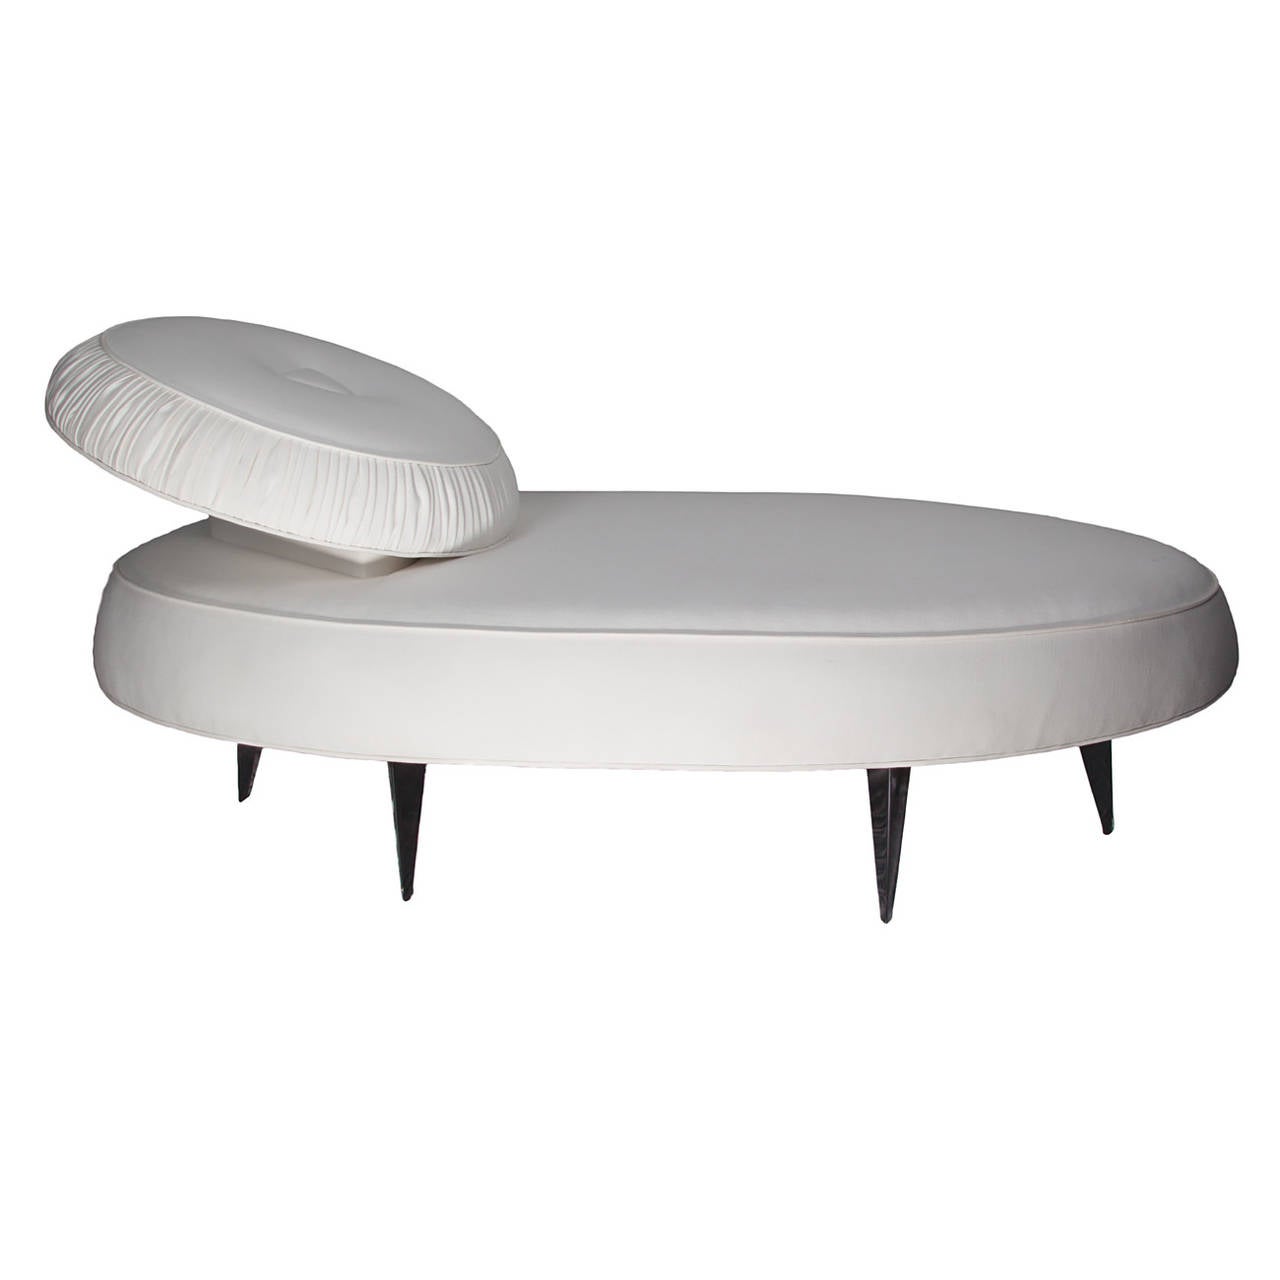 A highly unusual Art Deco chaise featuring black lacquer tapered wood legs and a raised pleated headrest. An elliptical shape combined with the articulated headrest makes this piece a rare find. Newly refinished and re-upholstered in an ivory cotton